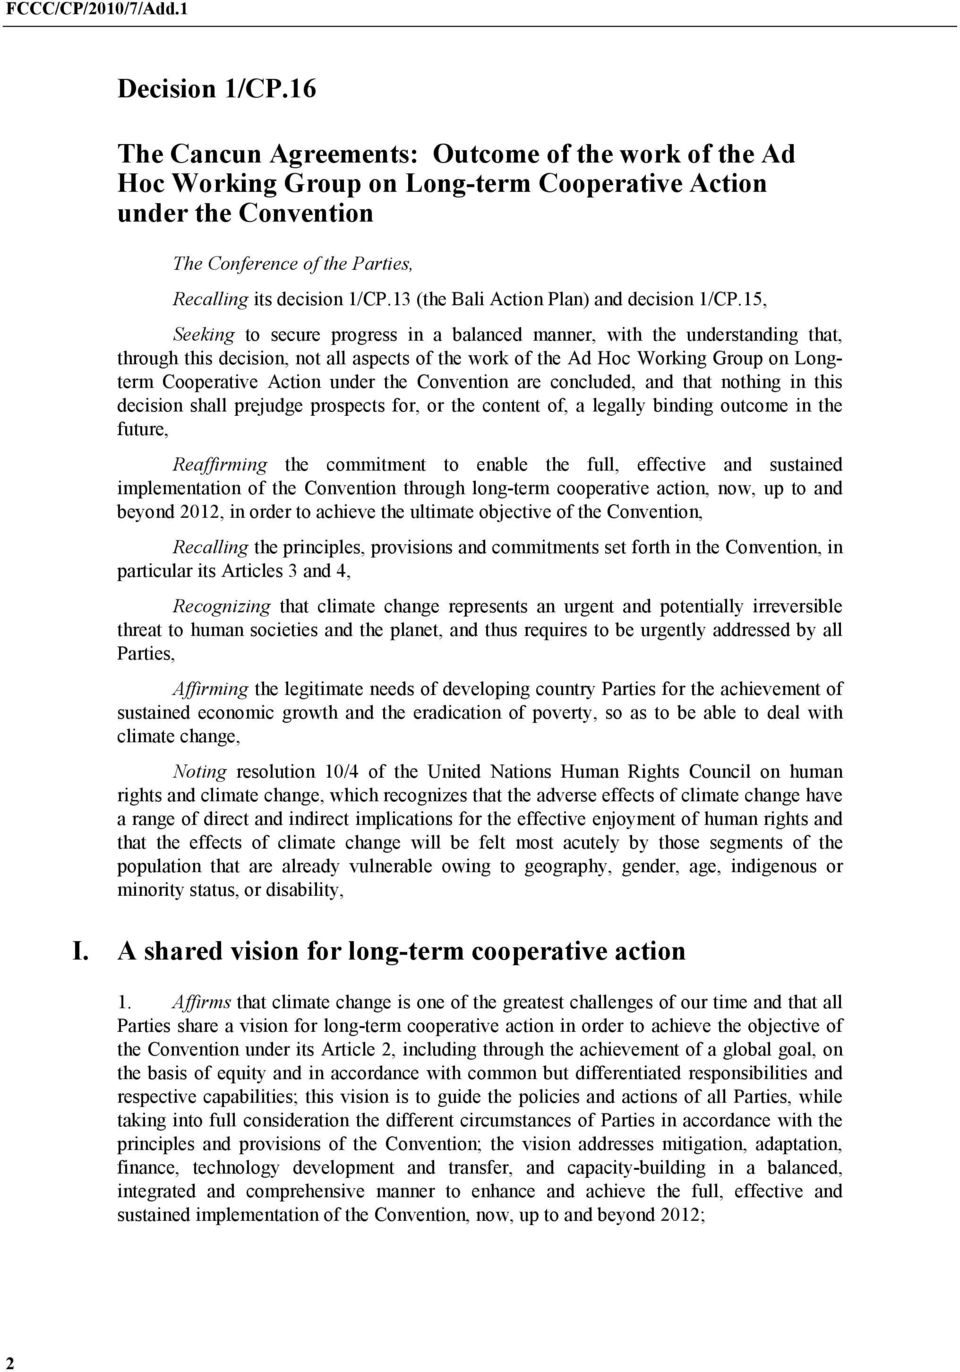 15, Seeking to secure progress in a balanced manner, with the understanding that, through this decision, not all aspects of the work of the Ad Hoc Working Group on Longterm Cooperative Action under